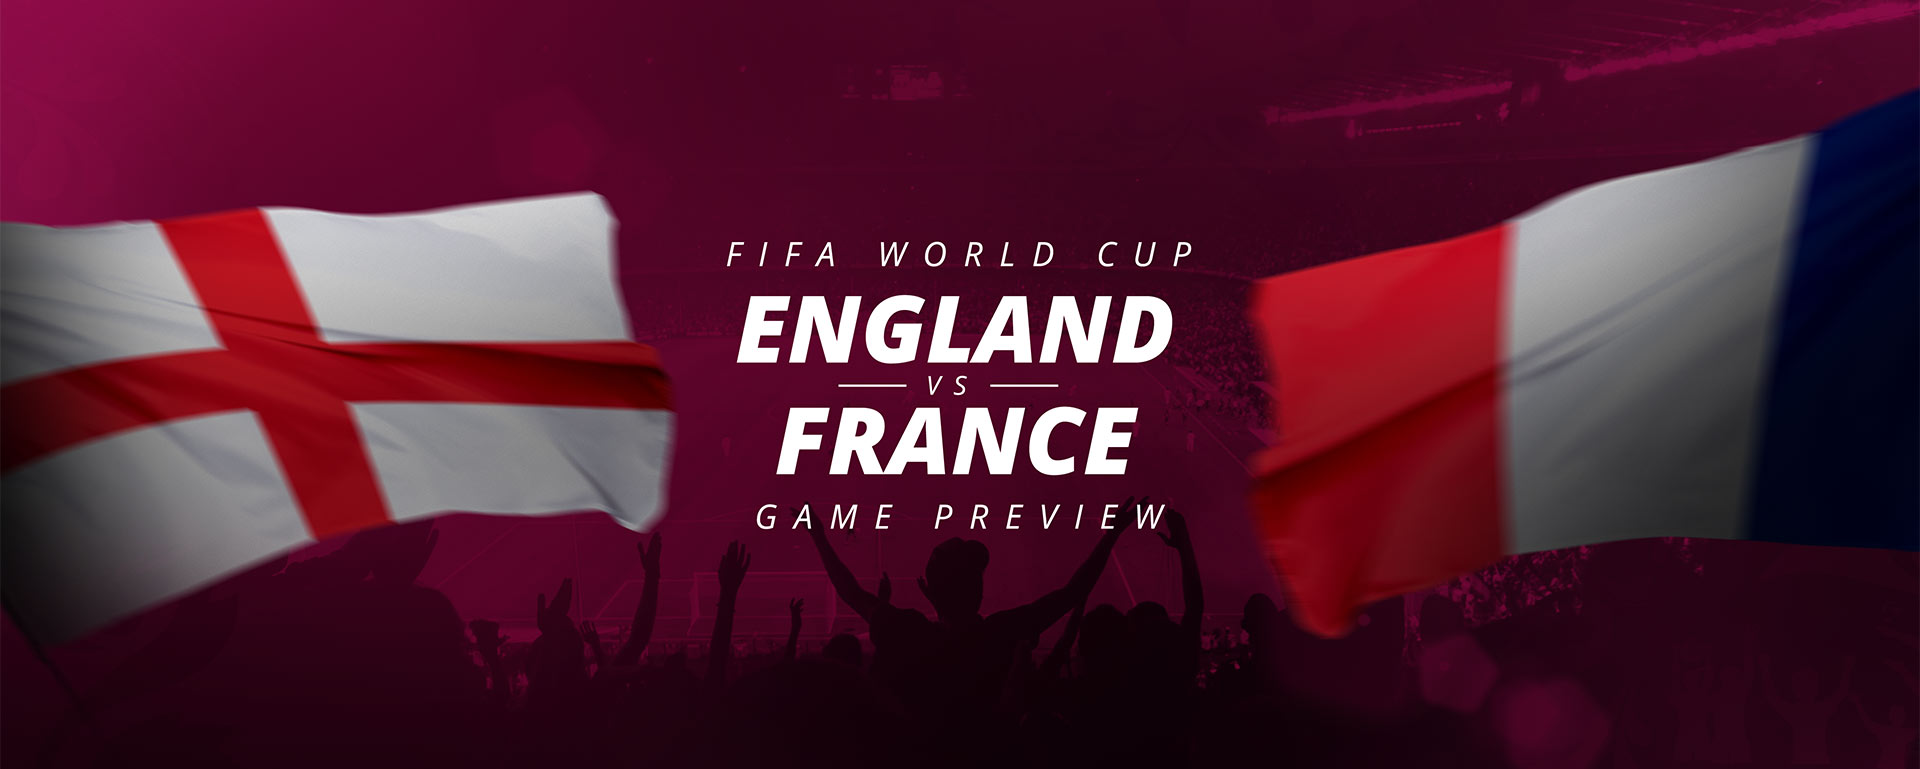 FIFA WORLD CUP: ENGLAND V FRANCE – GAME PREVIEW